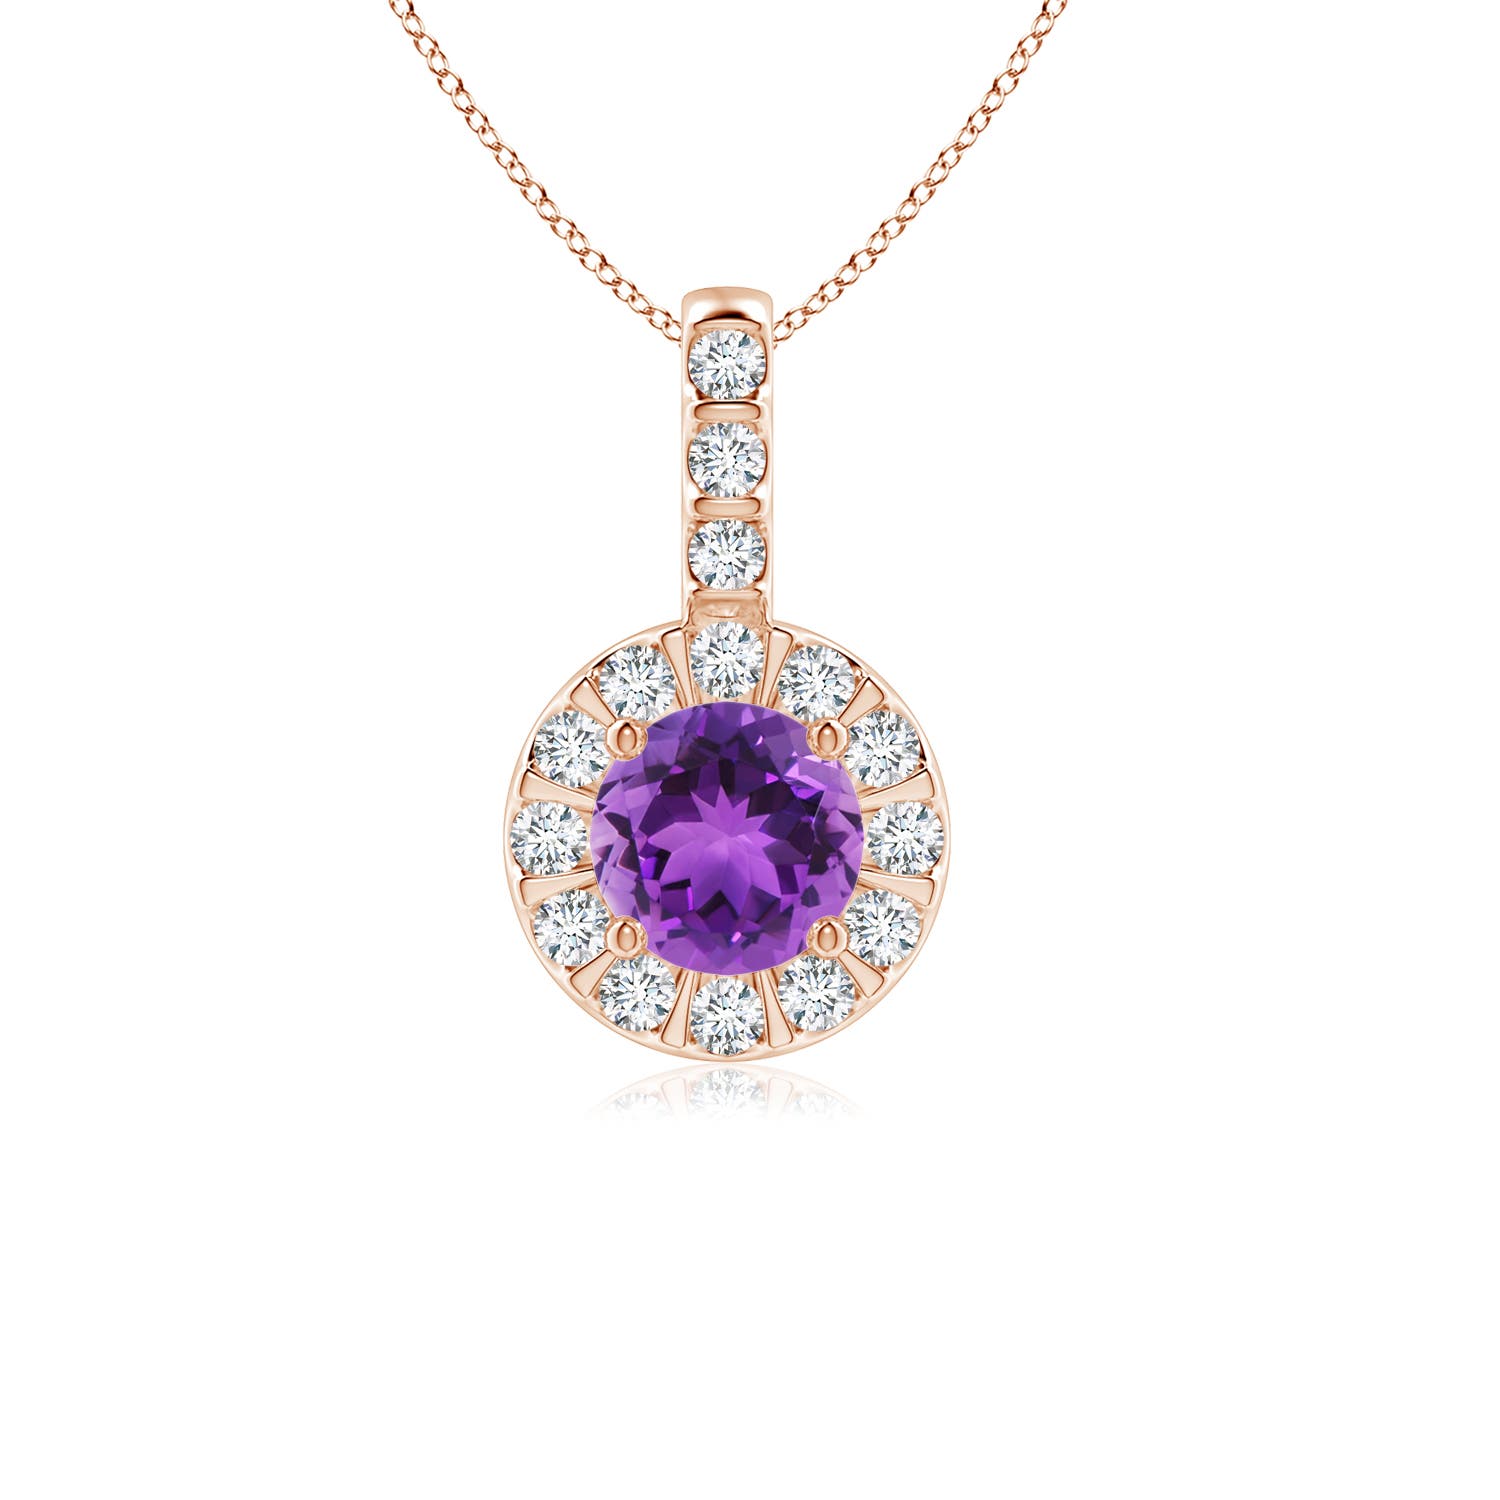 AAA - Amethyst / 0.63 CT / 14 KT Rose Gold